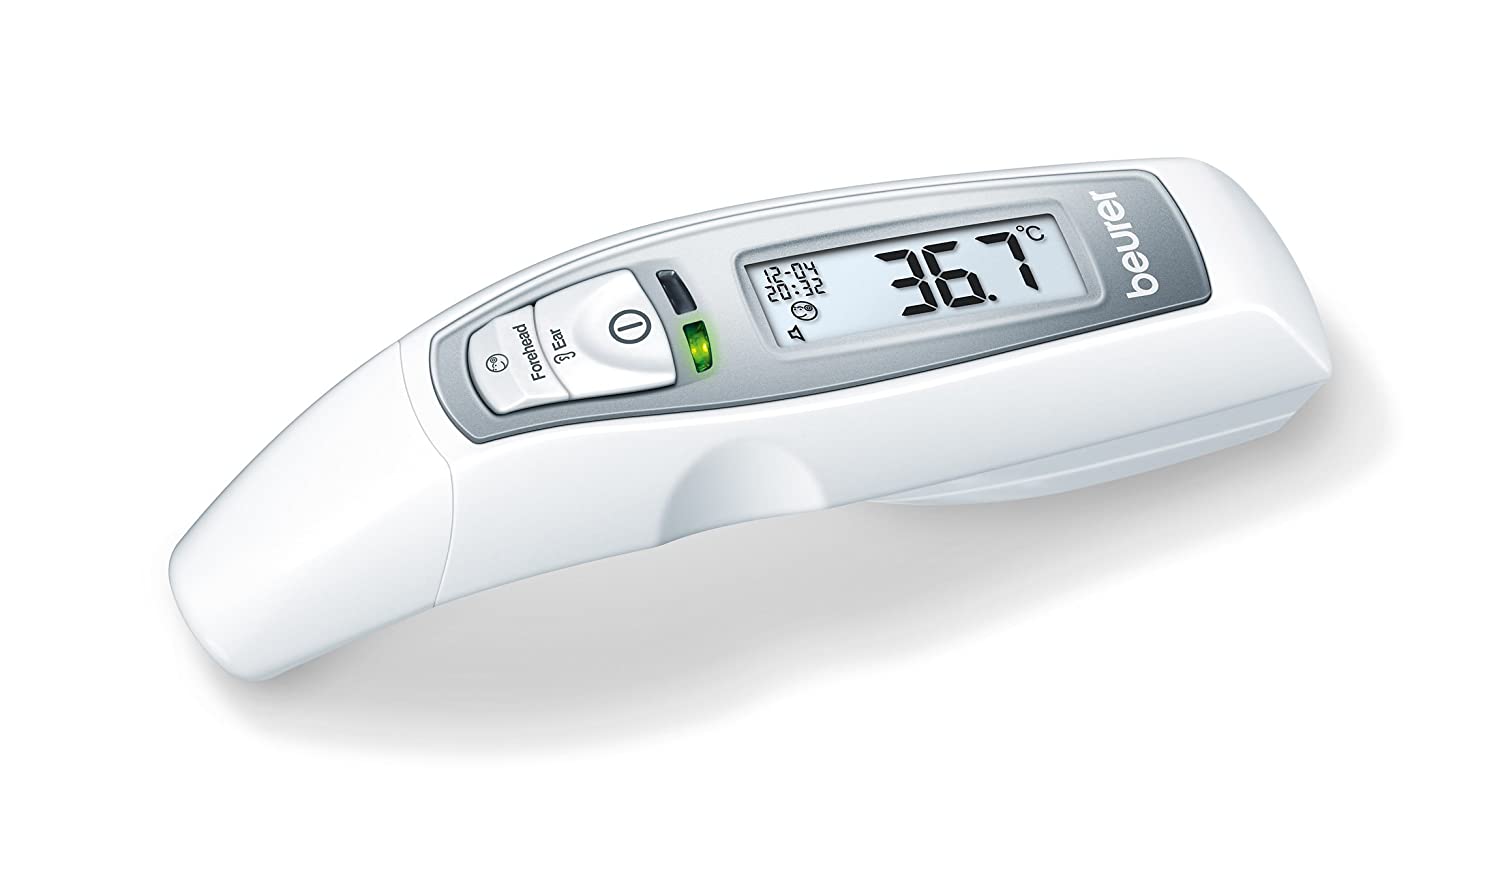 Beurer FT 70 Multifunctional Thermometer (for Measuring Surface Temperature of Objects or Liquids)